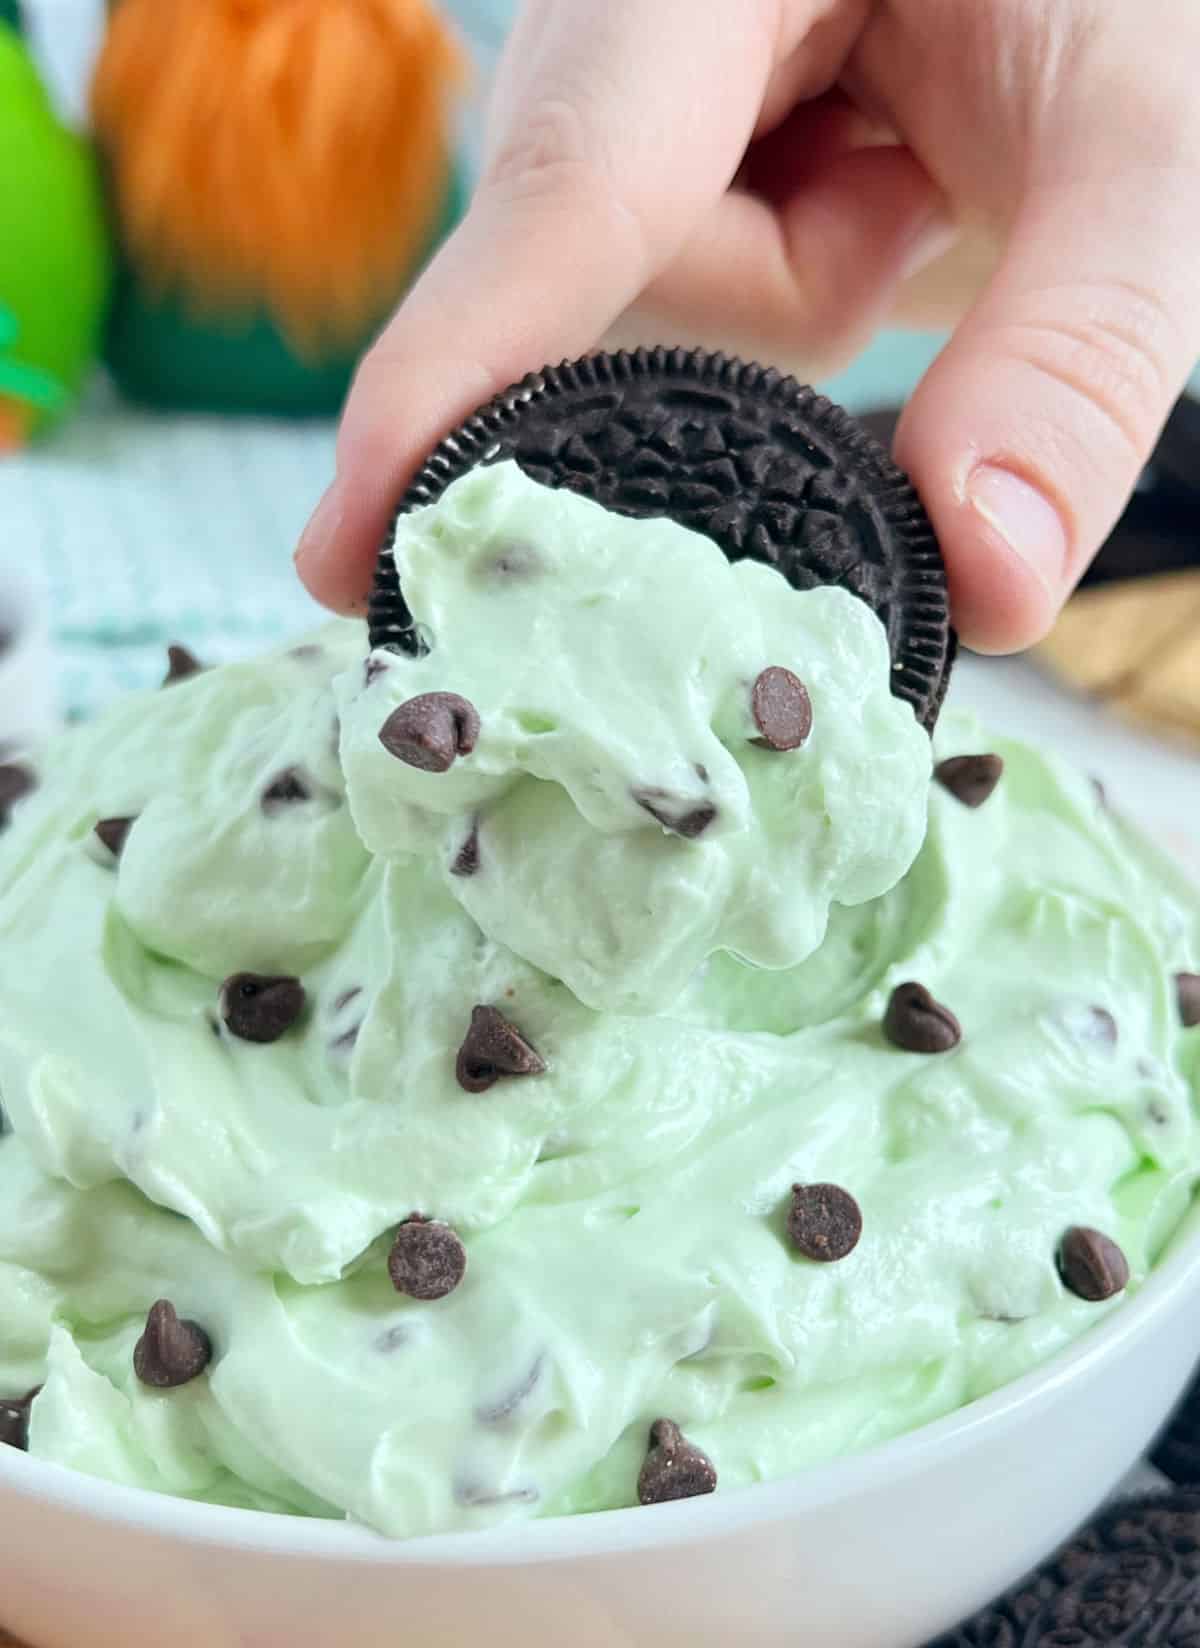 dip mint oreo cookie into mint chocolate chip dip.